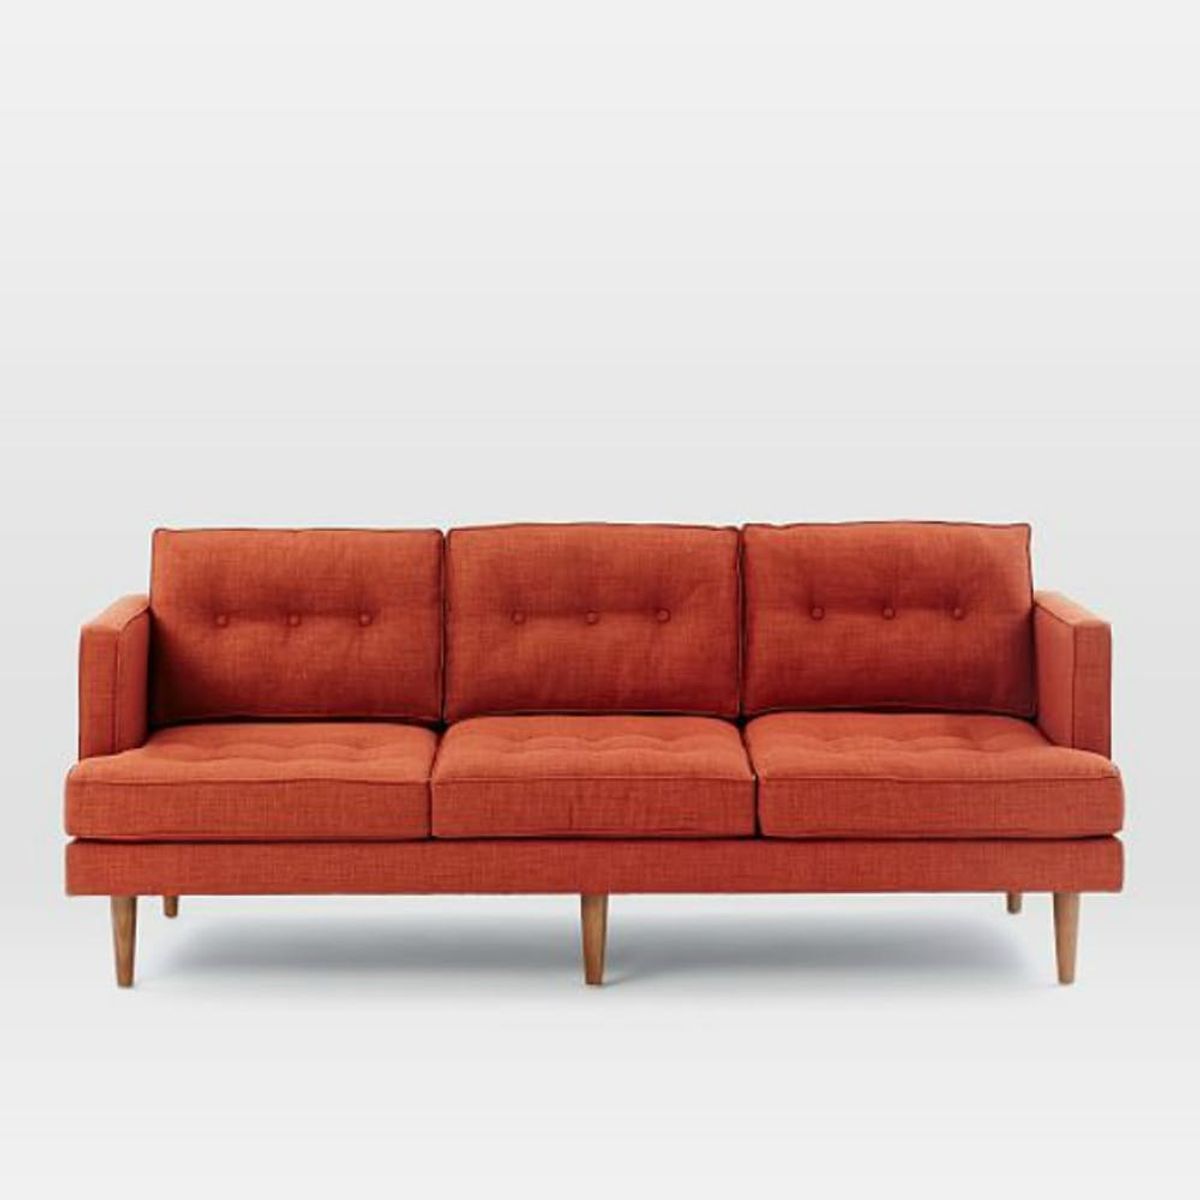 This Millennial-Favored Couch Just Got Pulled from Stores After This Scathing Online Review